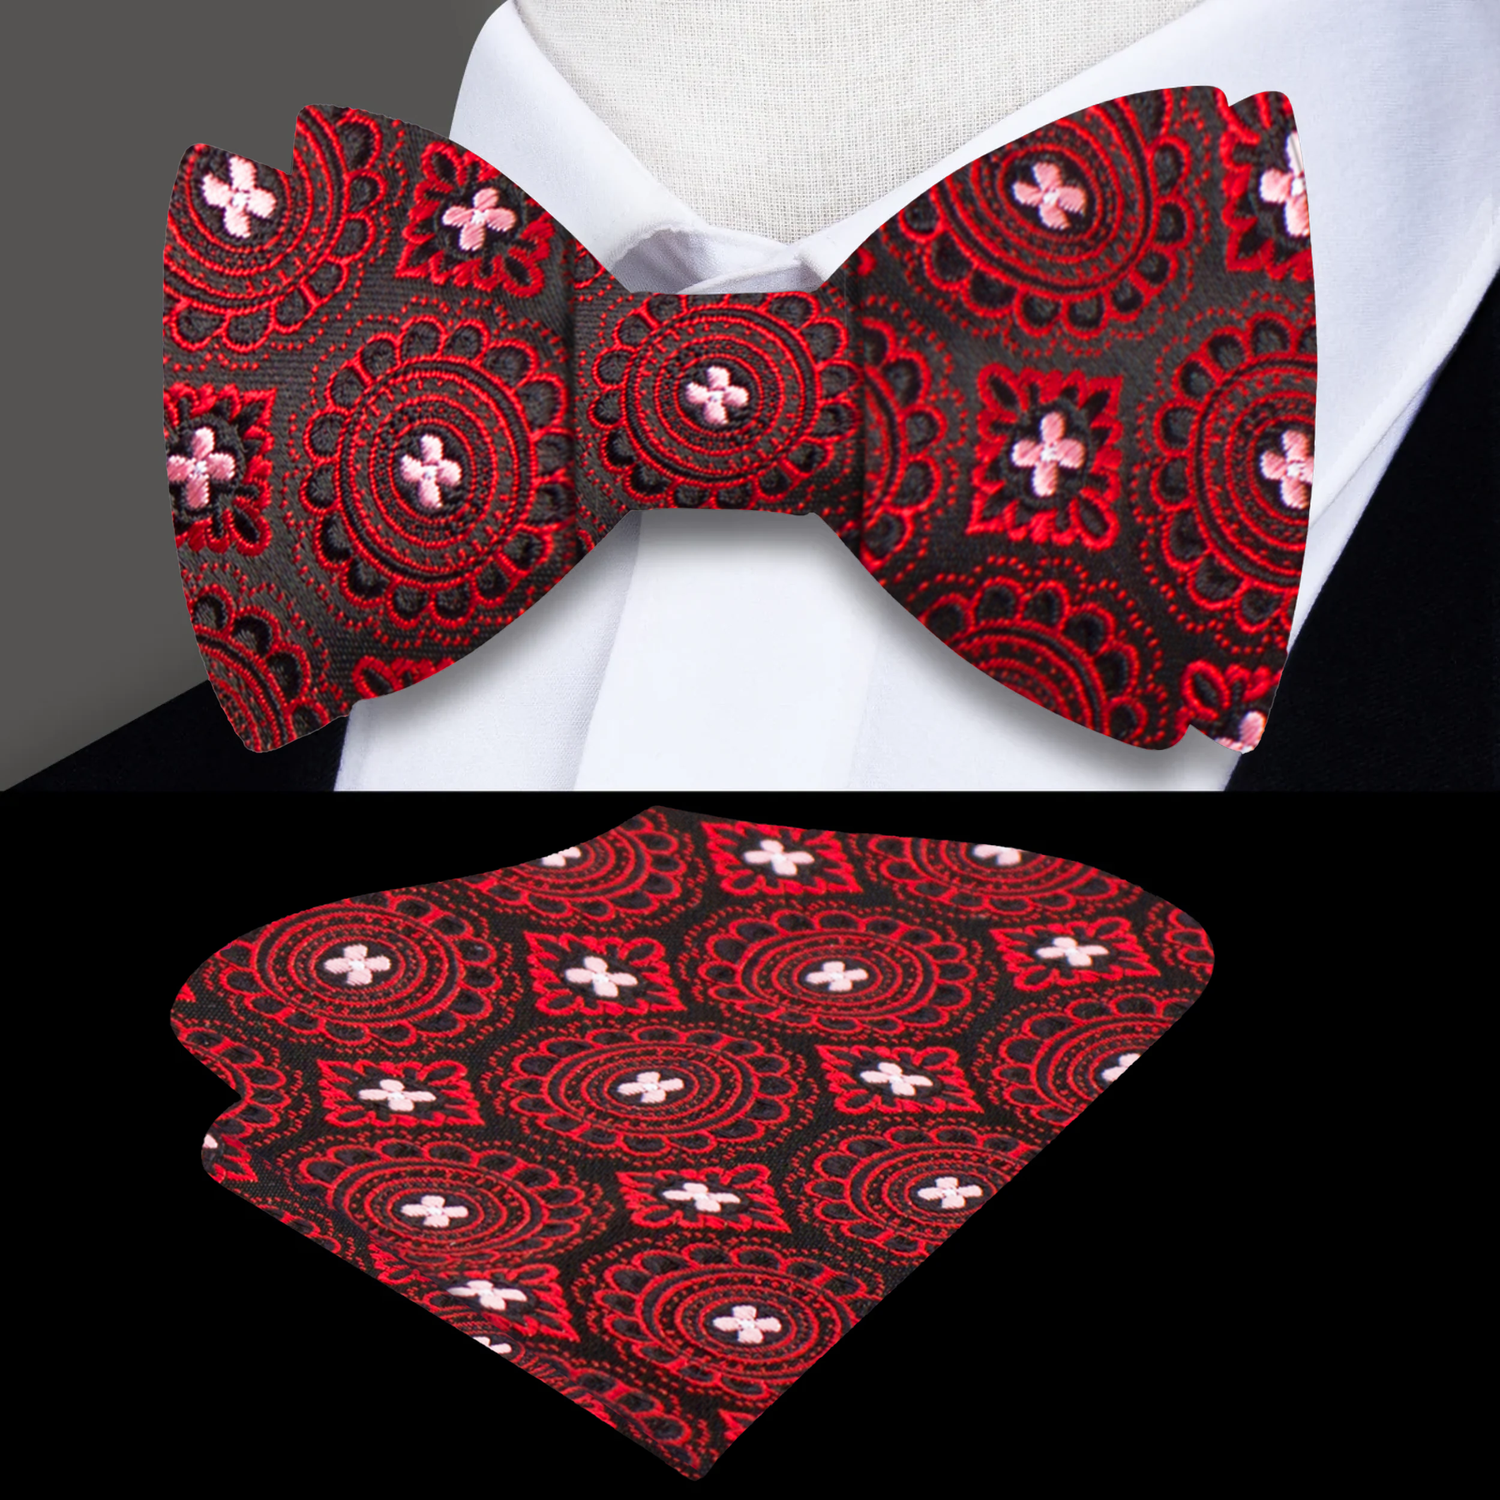 A Black, Deep Red Geometric with Floral Burst Pattern Silk Self Tie Bow Tie, Matching Pocket Square